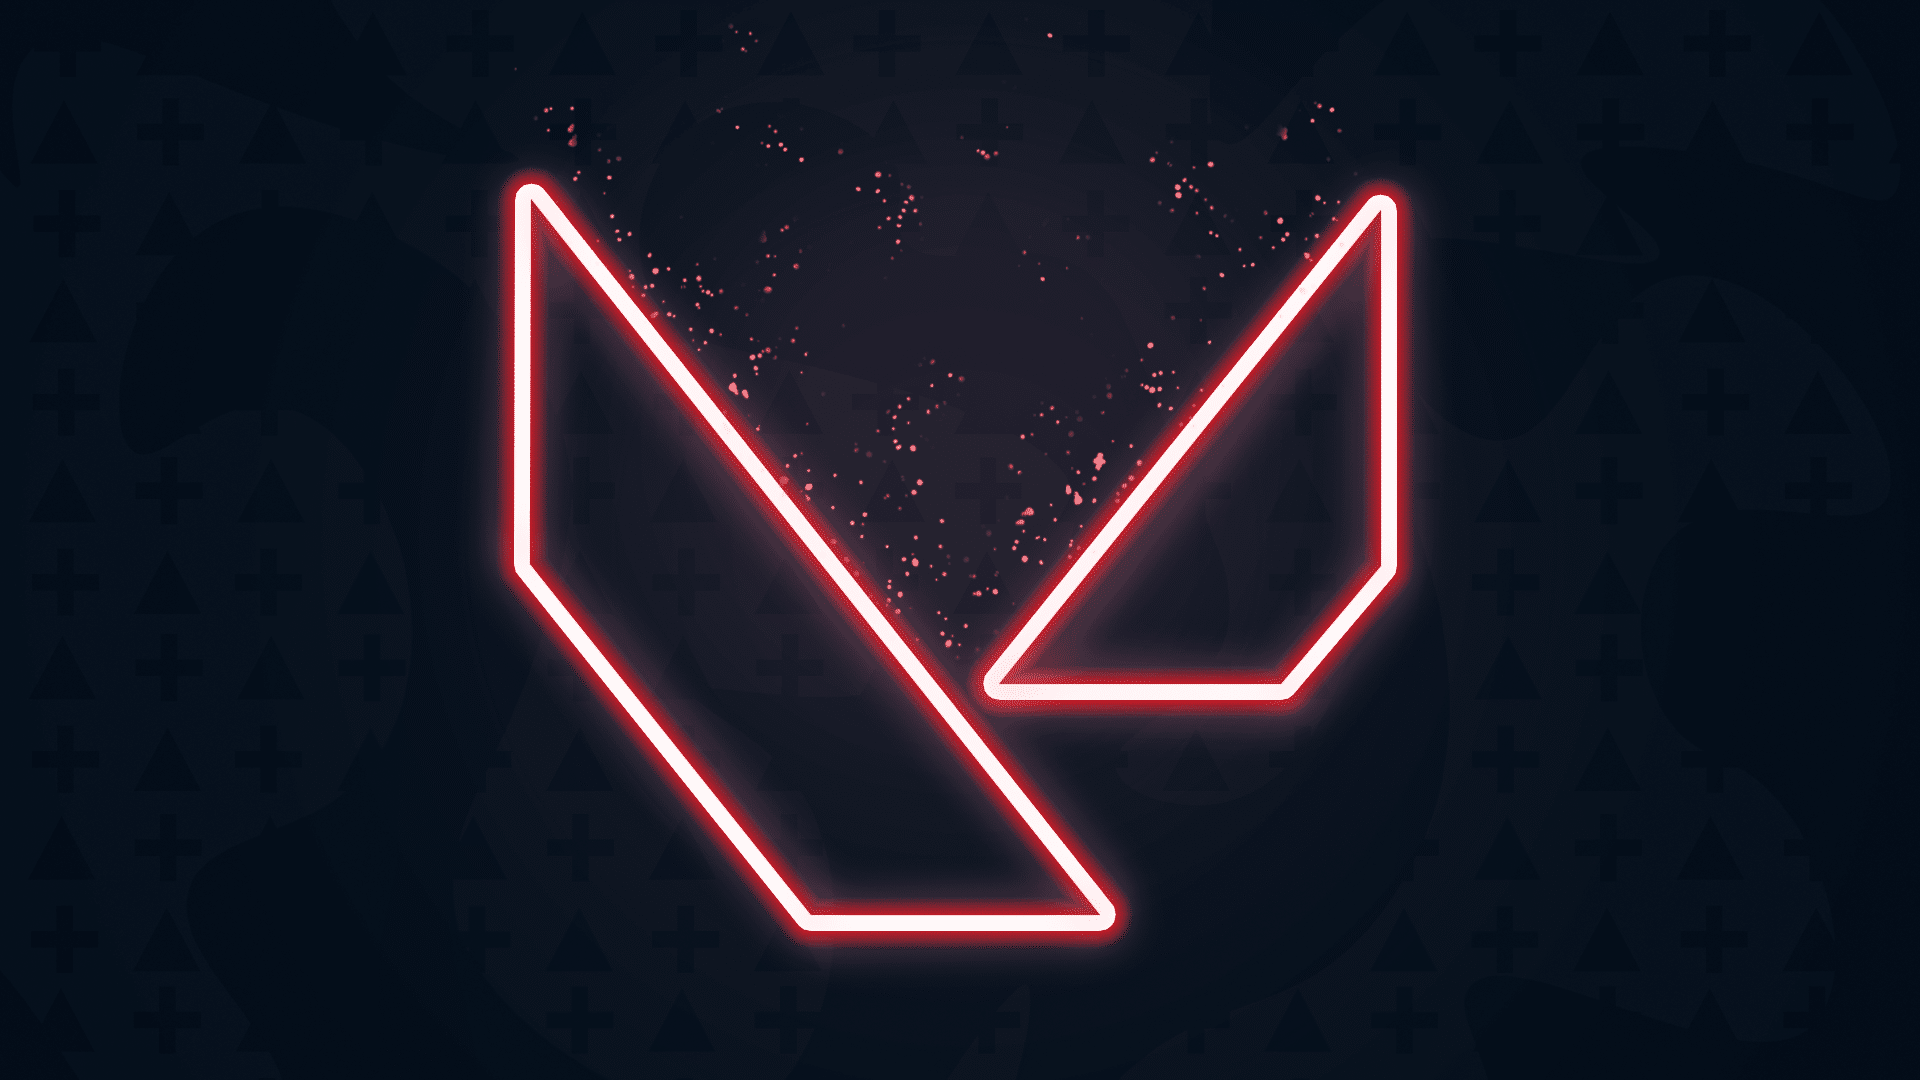 Valorant wallpaper Image by N/A – The Valorant logo with a red glowstick-like look.